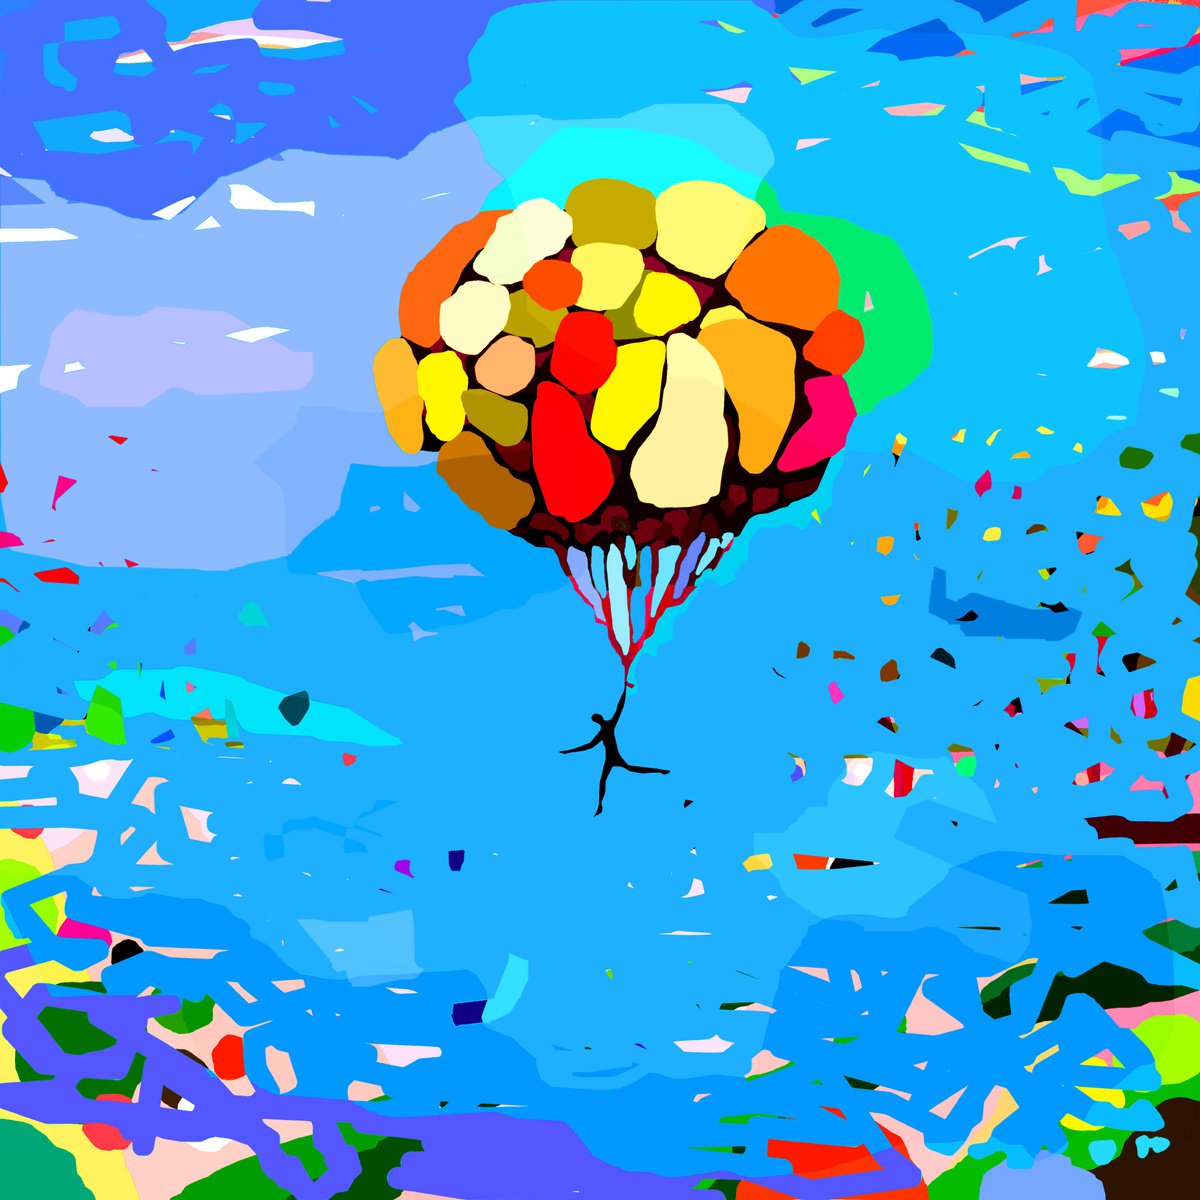 The Balloon of the Good Retirement Park (pop art, skyscape) by Alejos - Pop Art landscapes